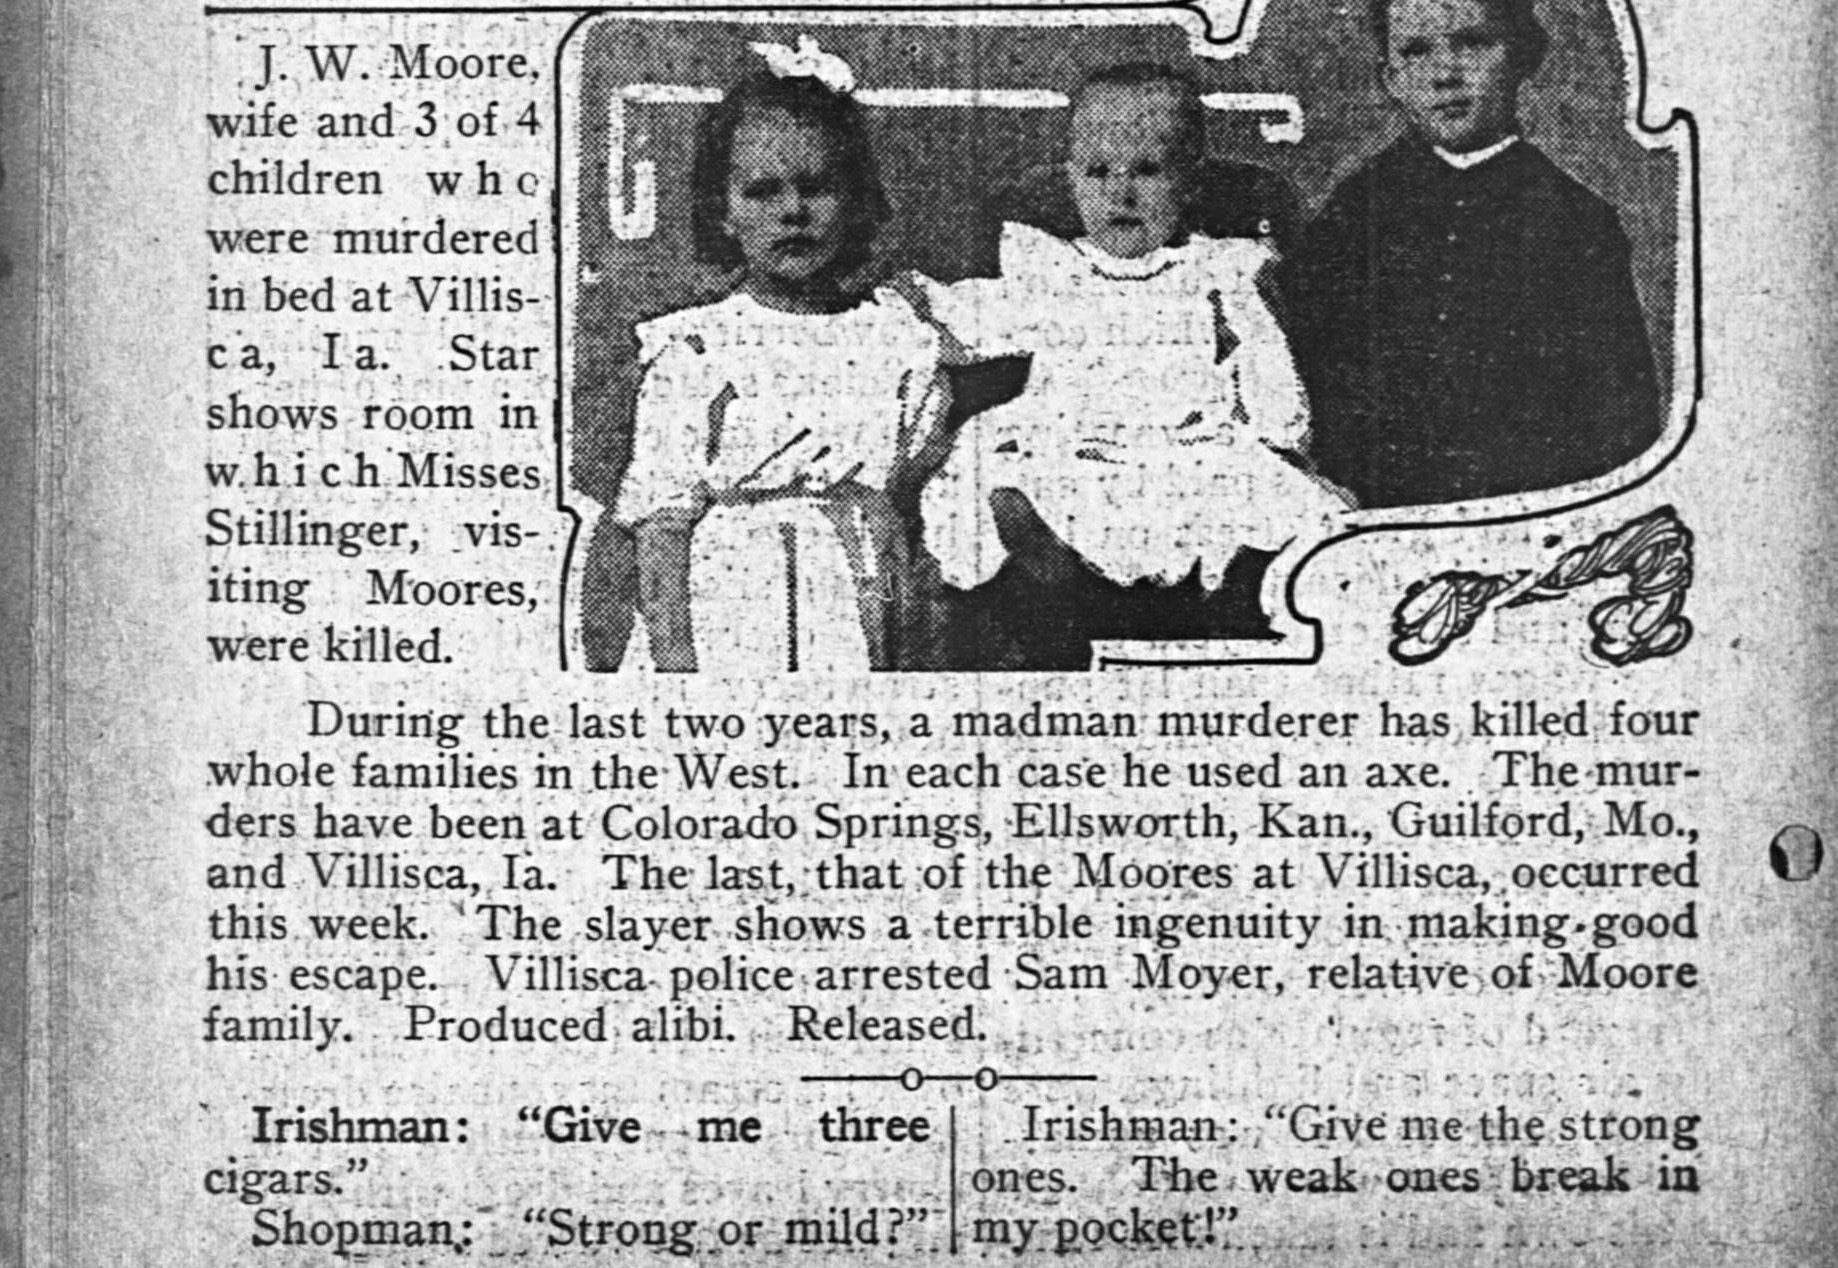 to show the young moore children